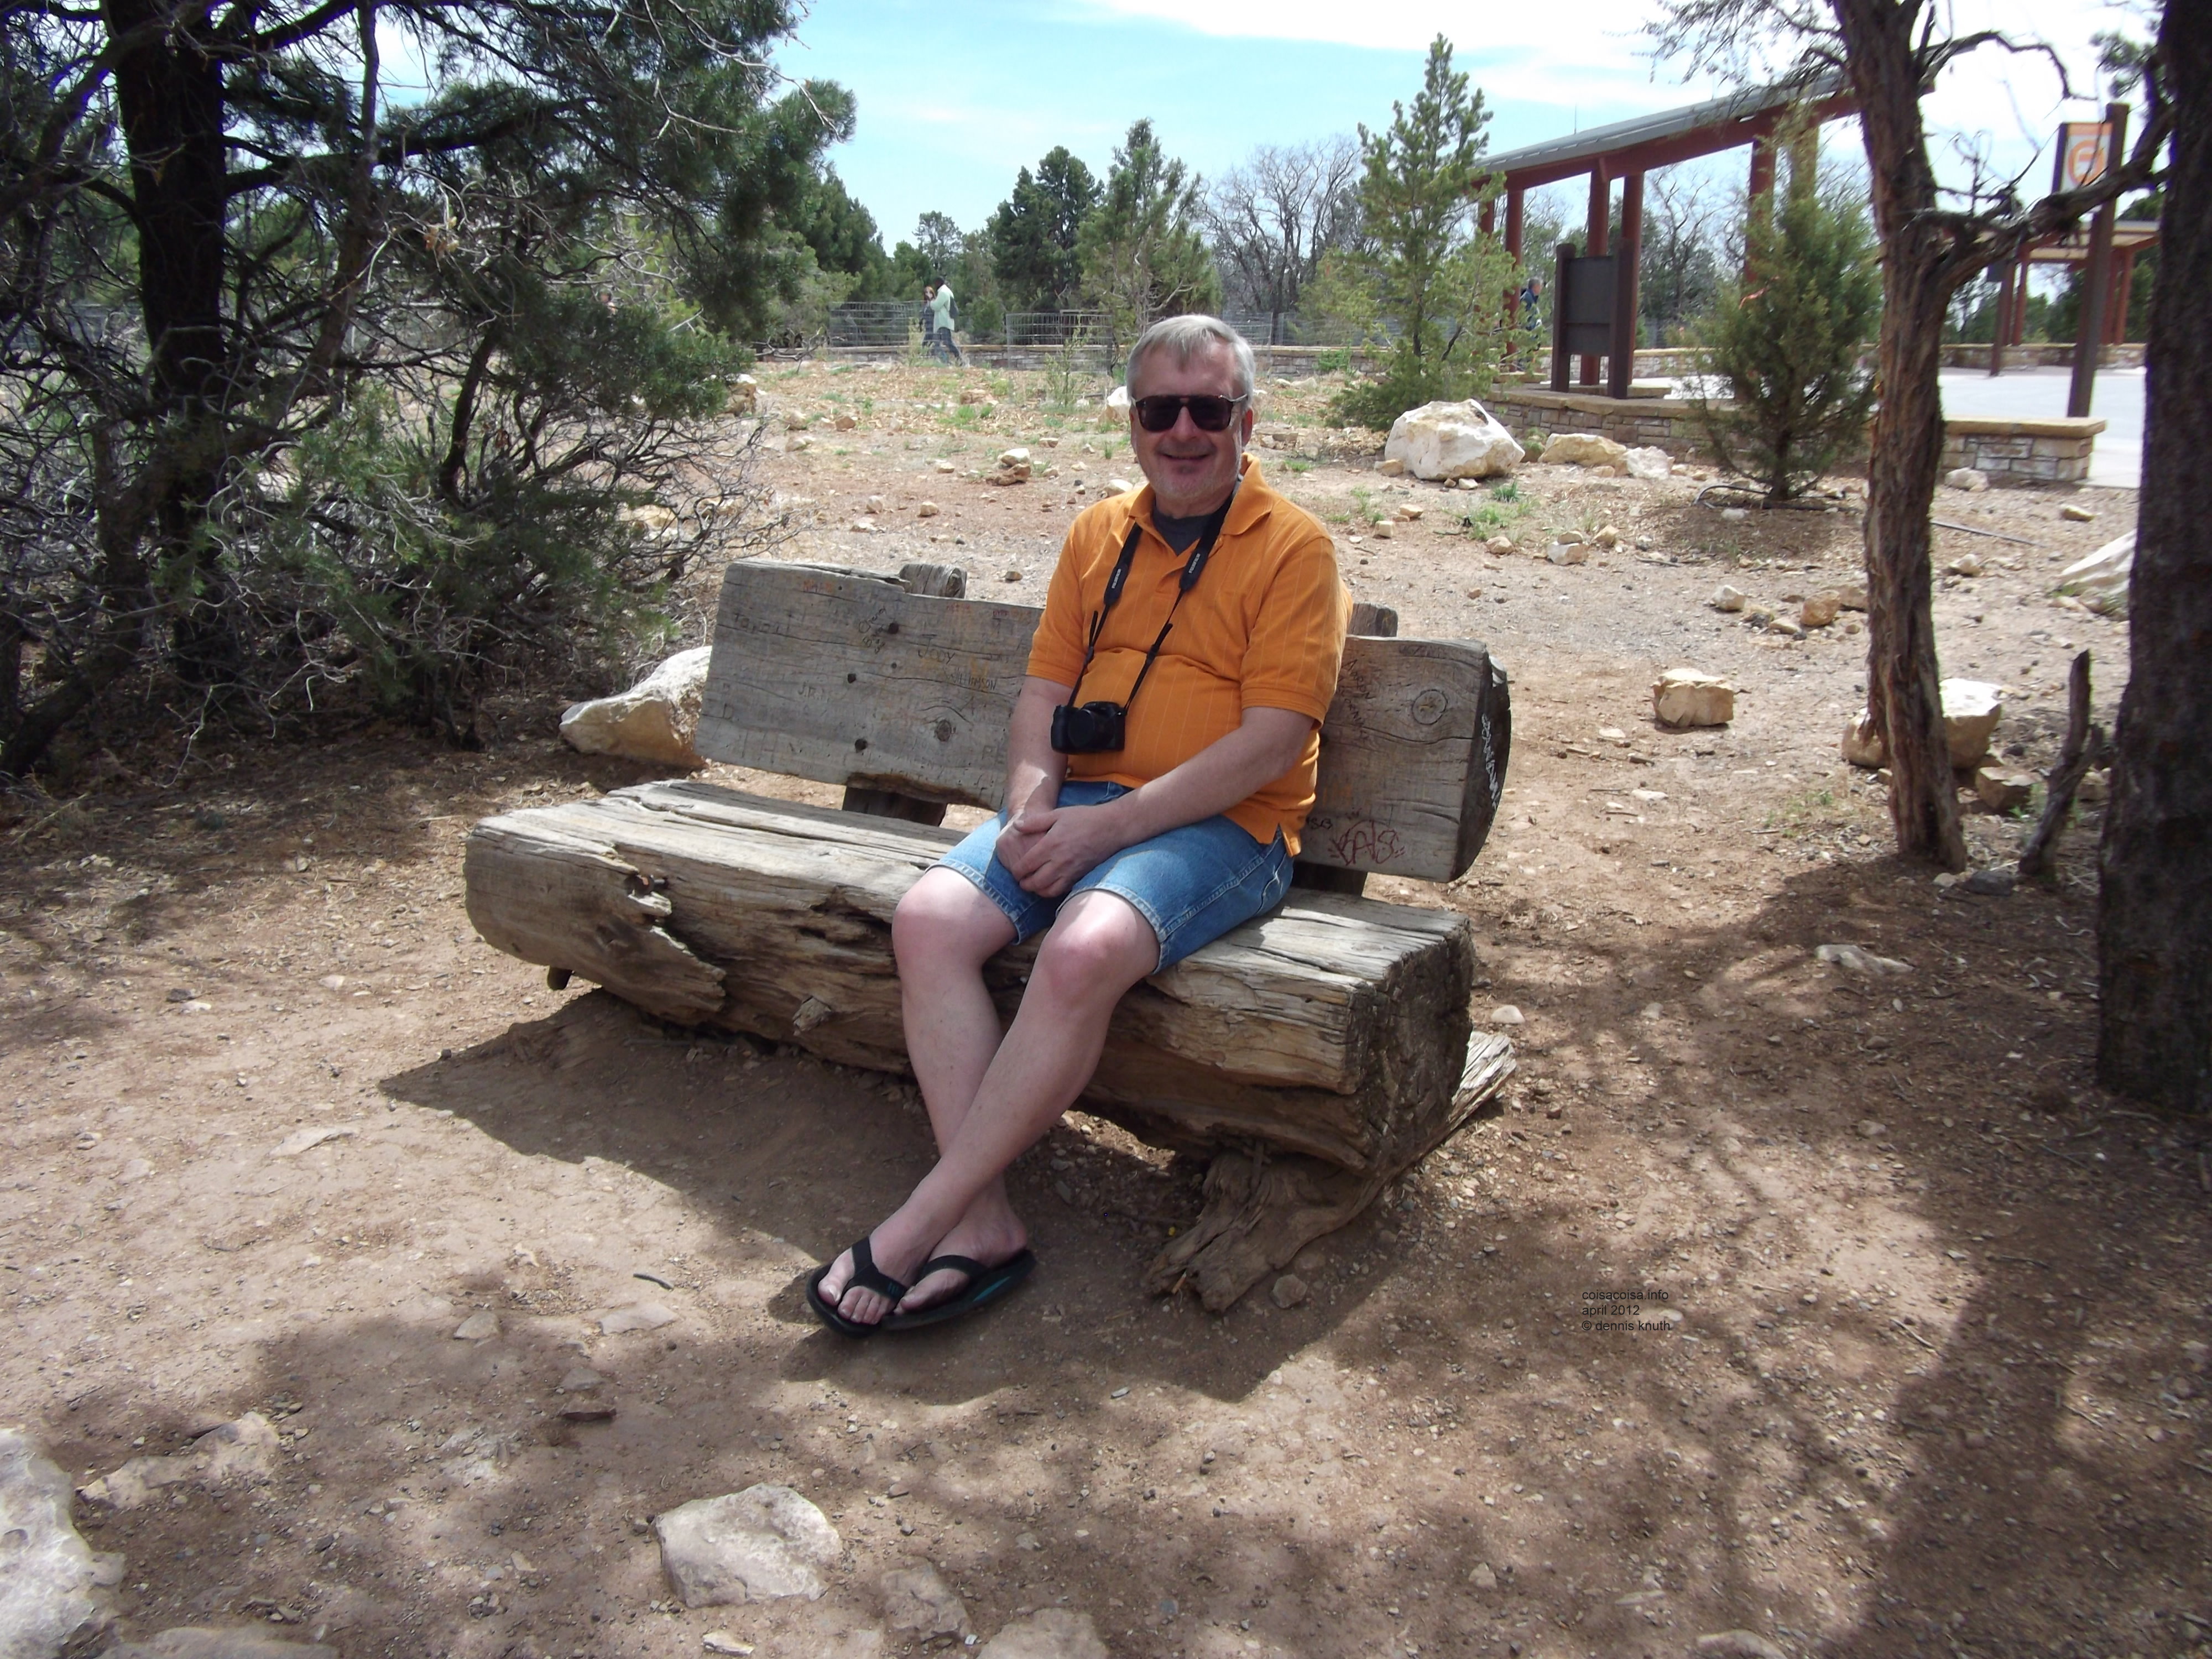 Dennis Knuth setting on a bench at the Grand Canyon